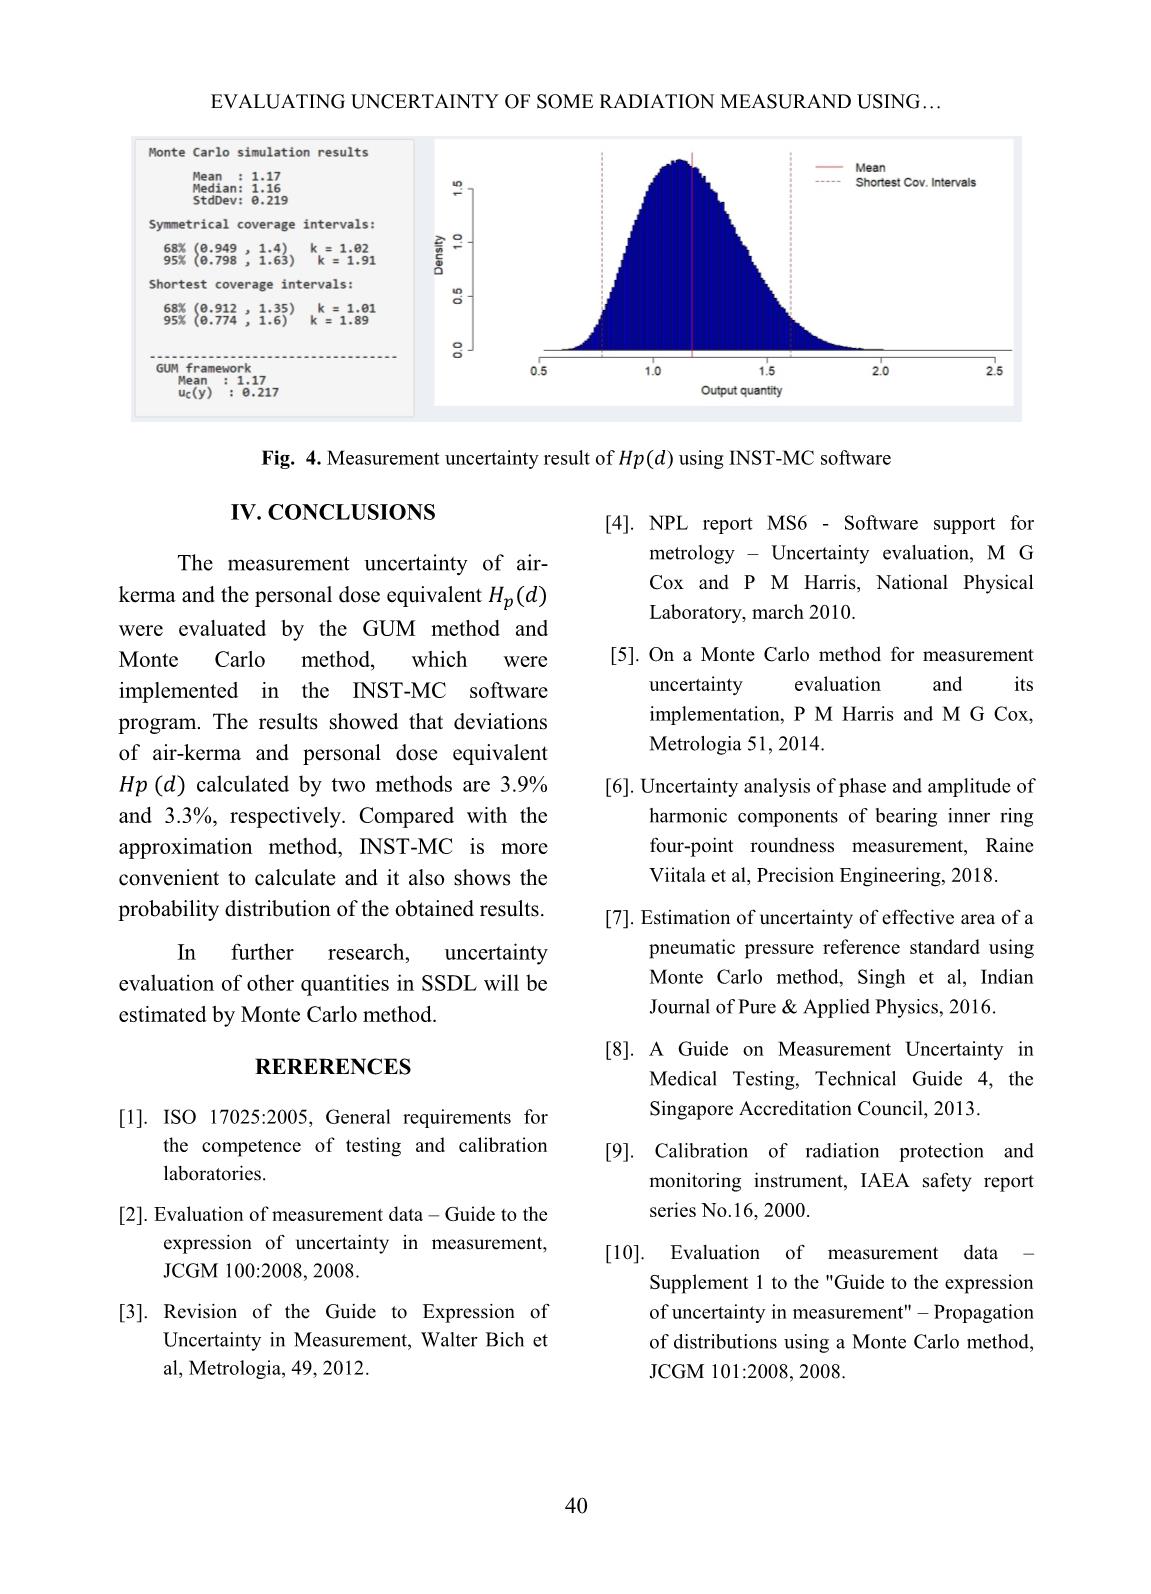 Evaluating uncertainty of some radiation measurand using Monte Carlo method trang 7